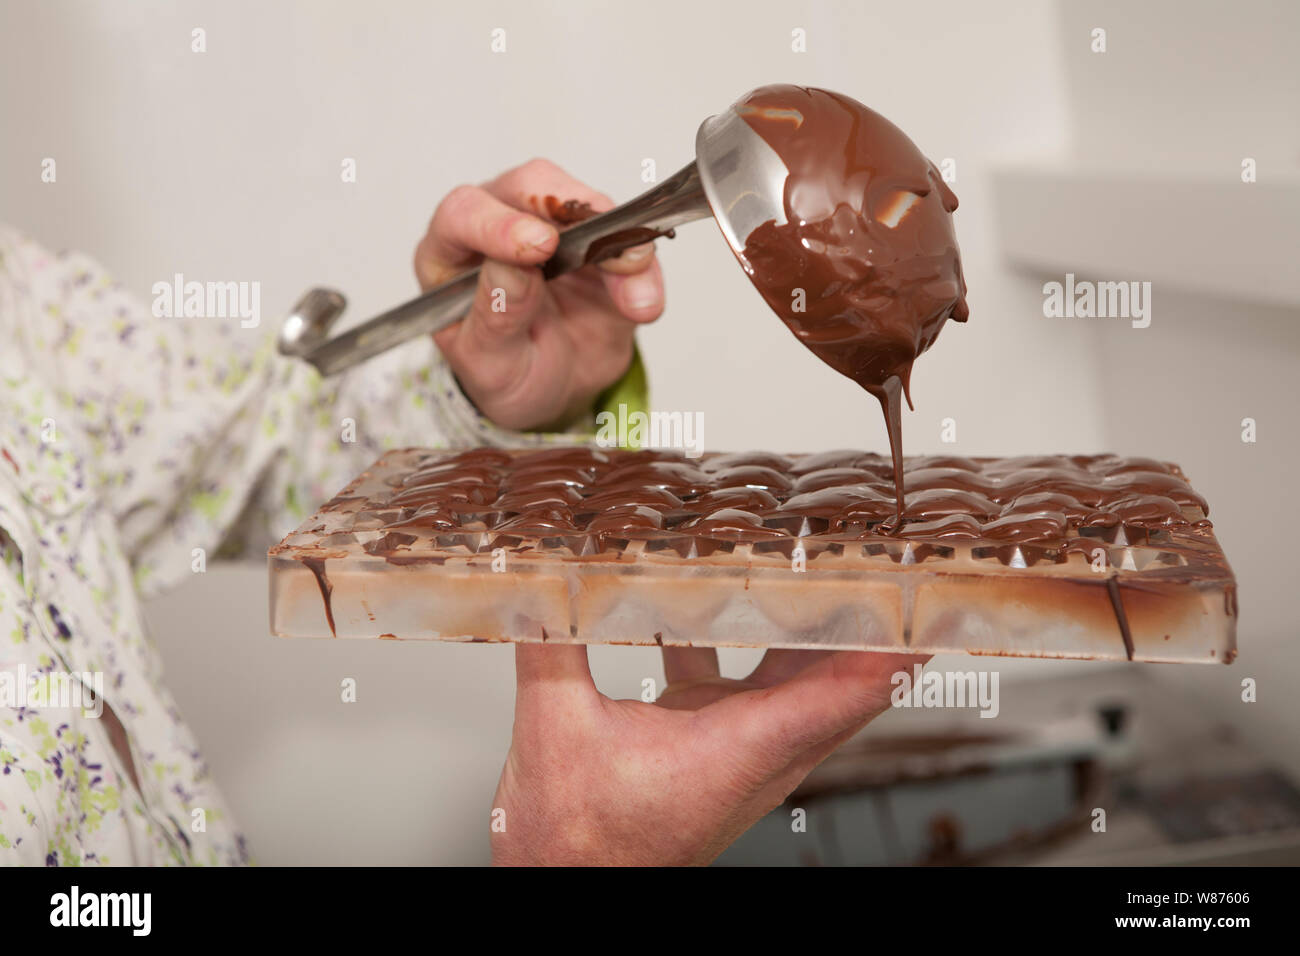 pouring molten chocolate into a mould to make chocolates. Stock Photo